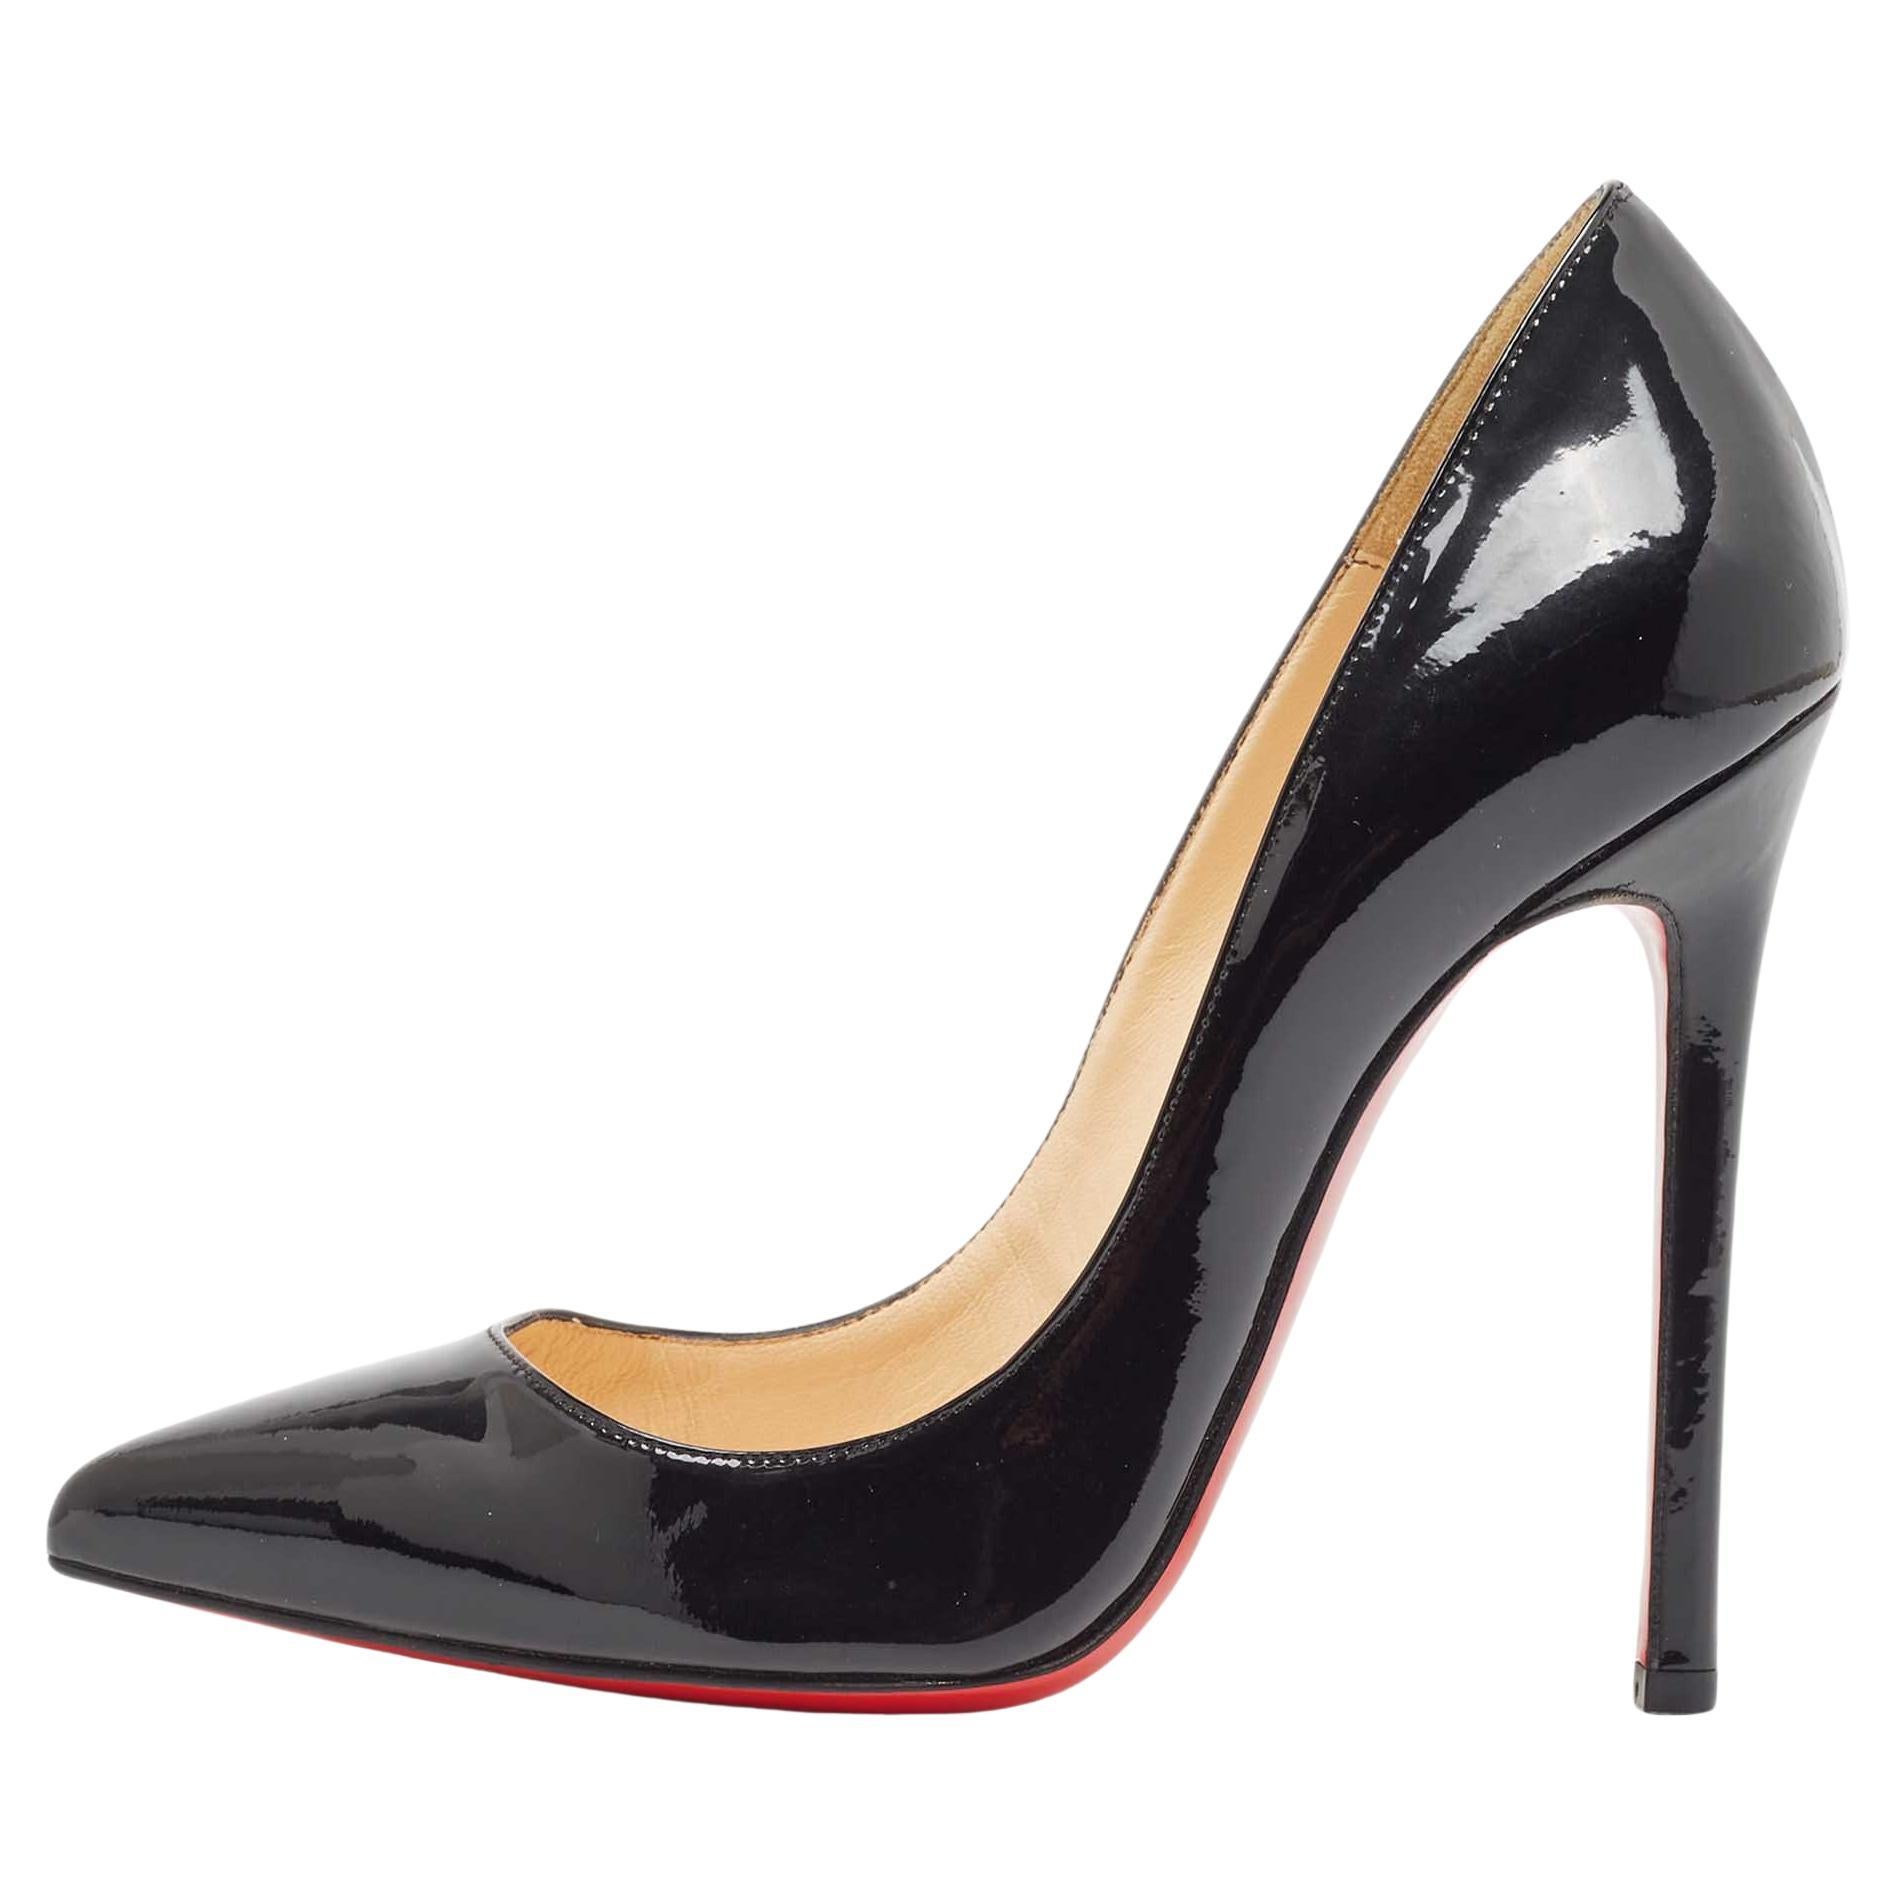 Christian Louboutin Black Patent Leather Pigalle Pumps Size 37